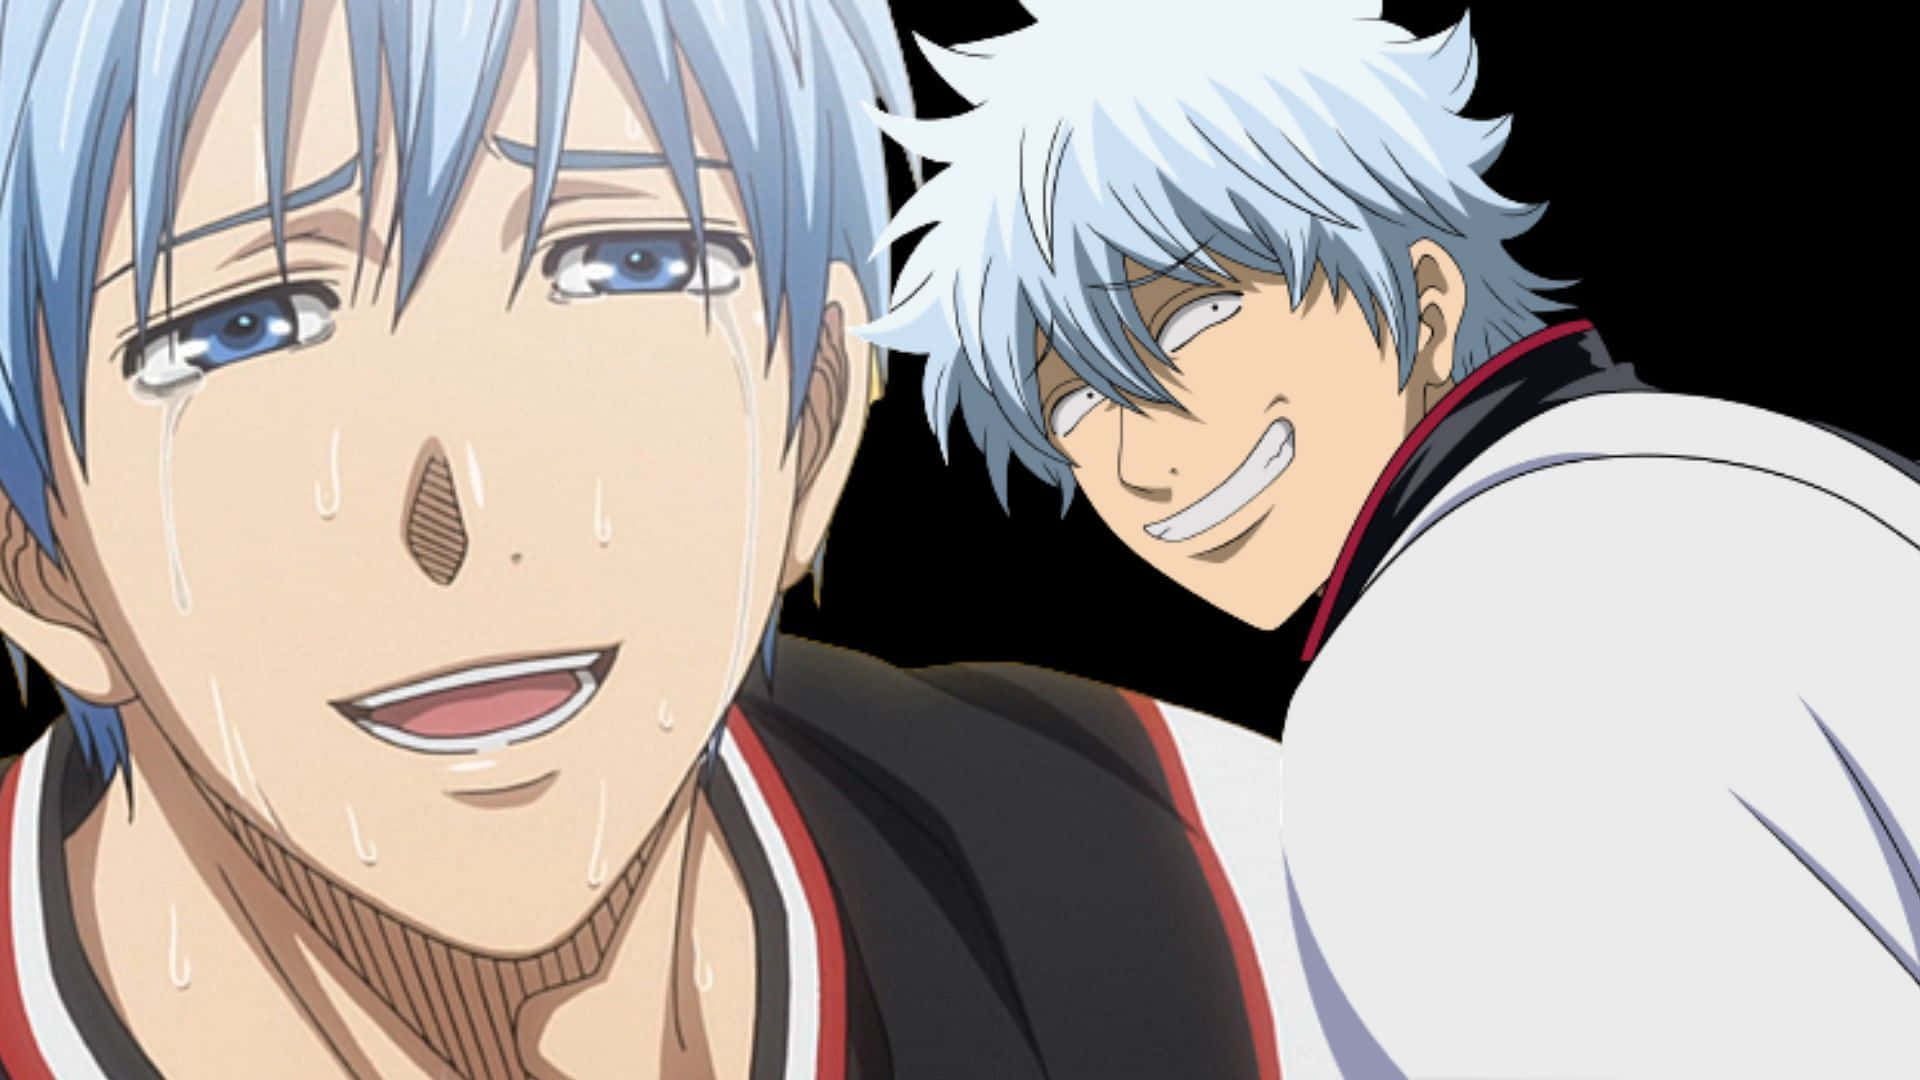 Gintoki and His Friends Bring “The Odds Job” to Life